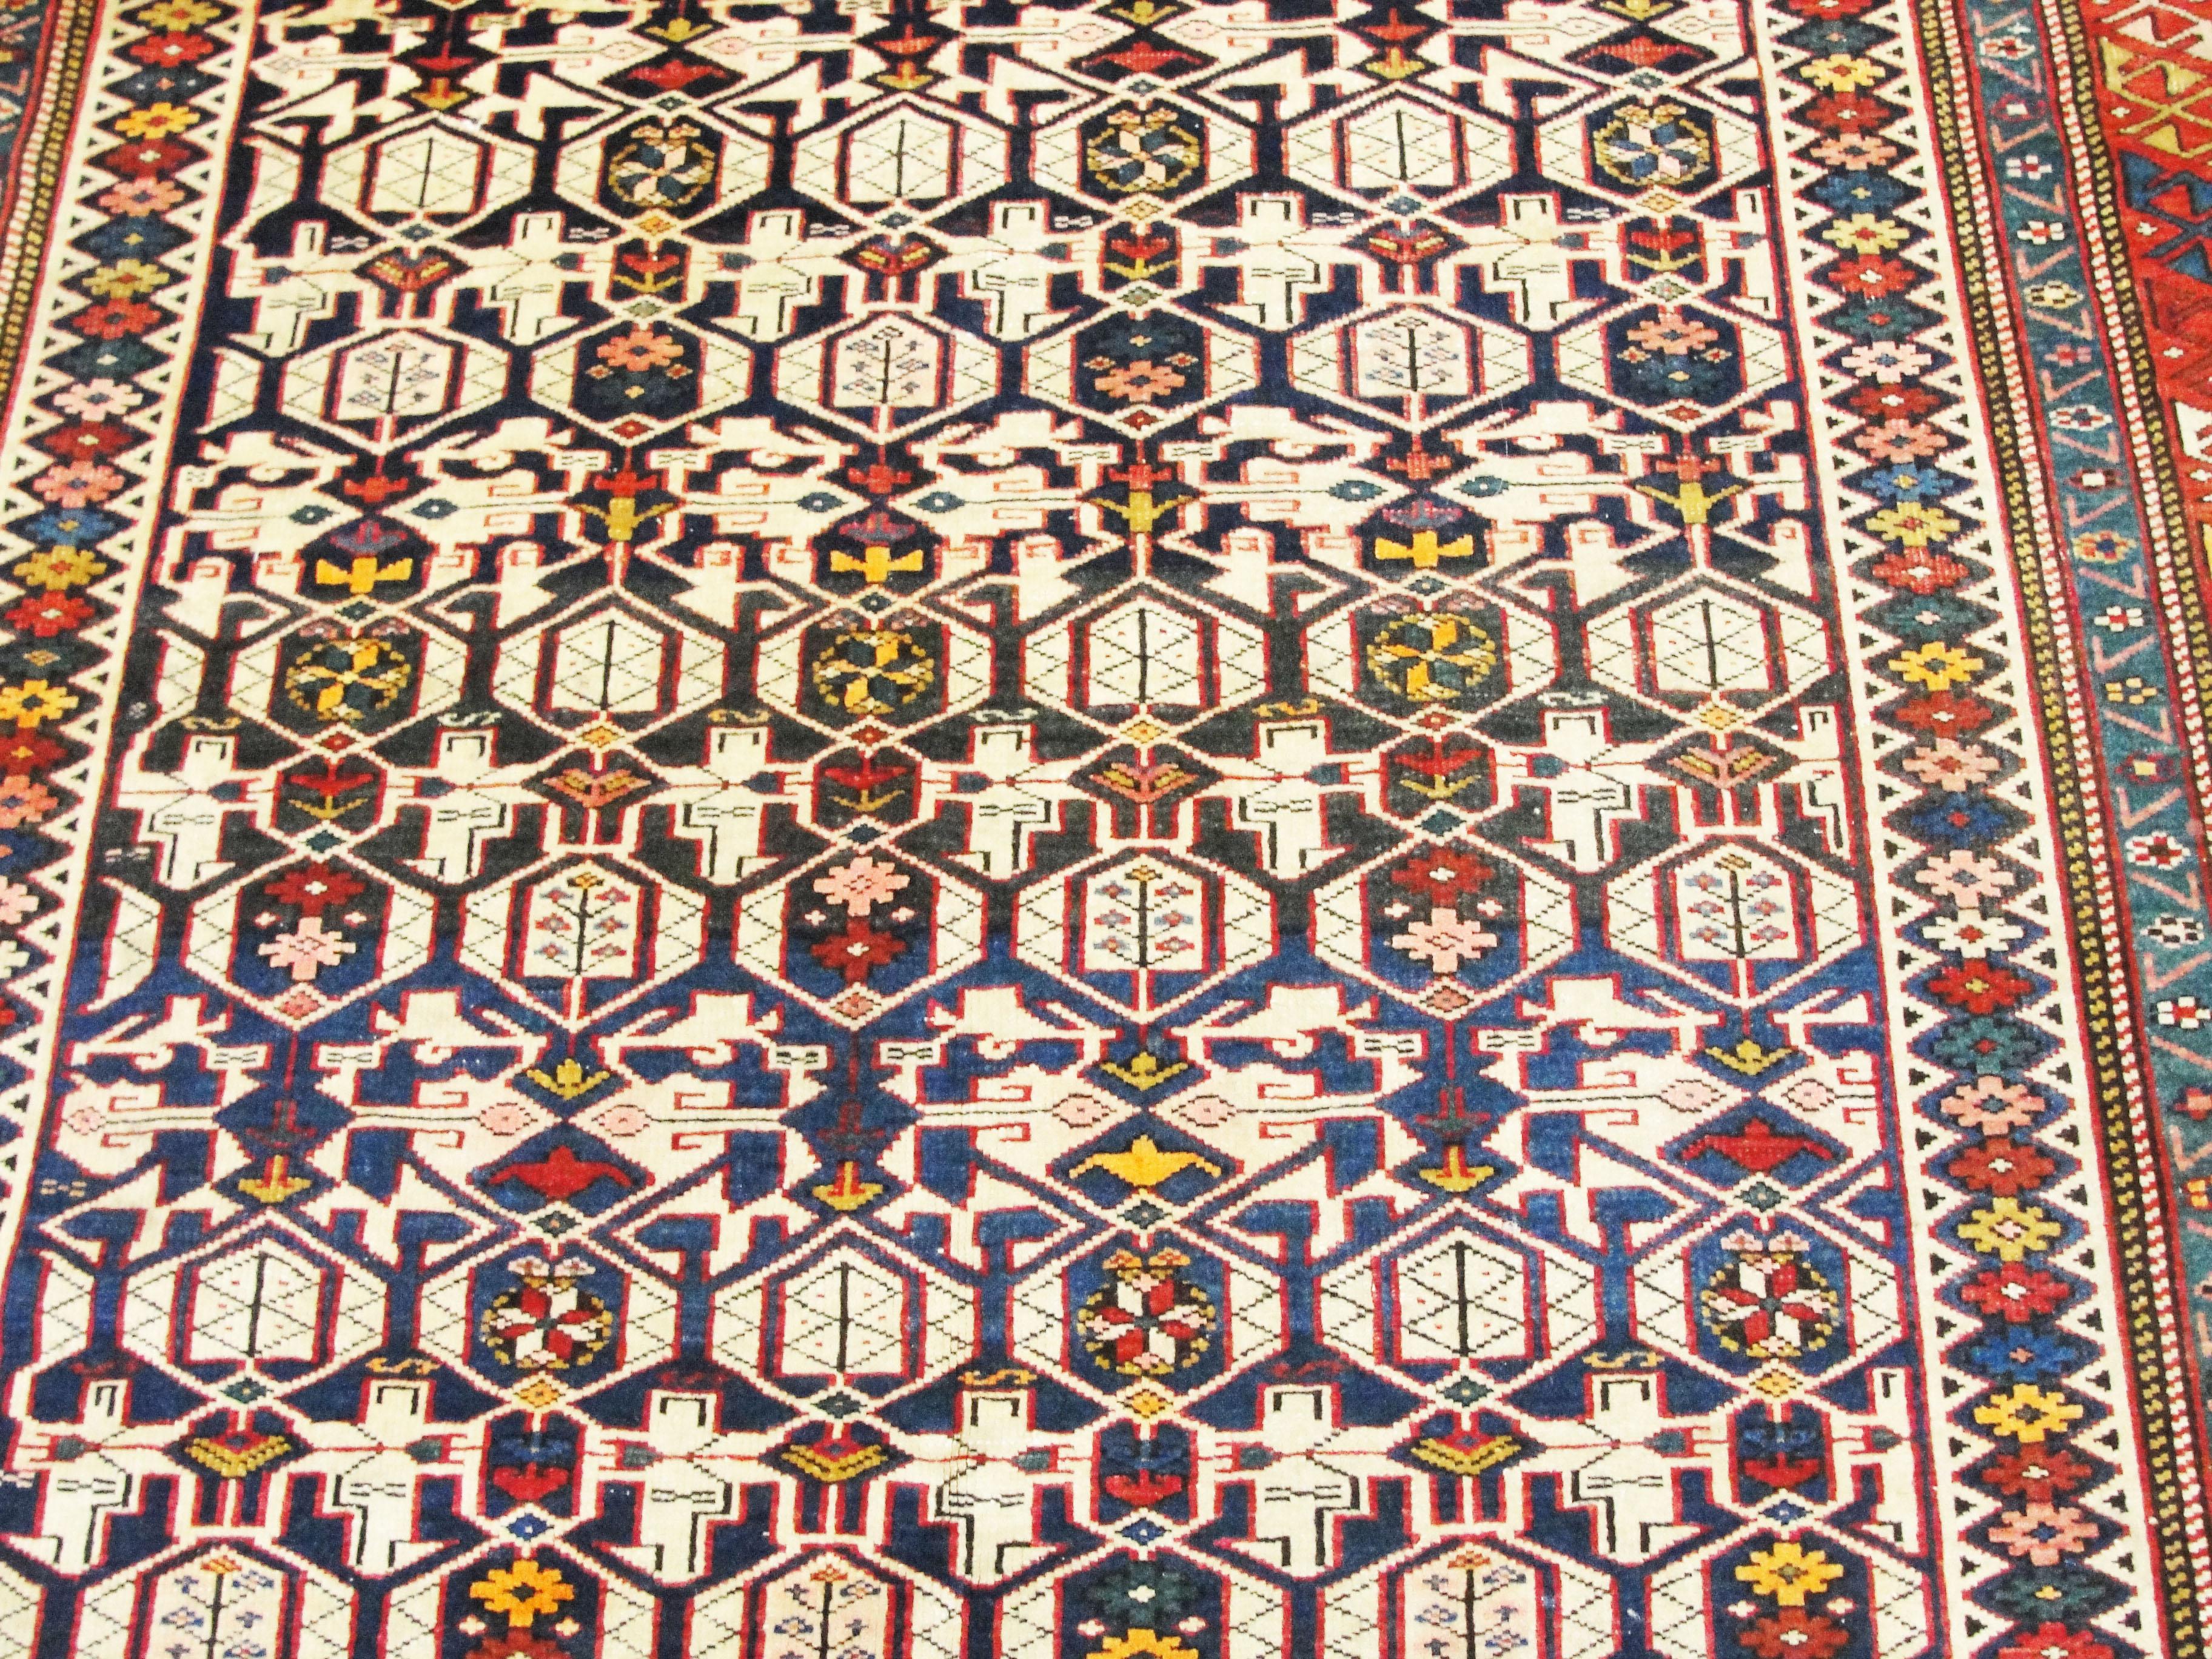 Super Quality Antique Kuba or Quba Caucasian Rug In Excellent Condition For Sale In Evanston, IL